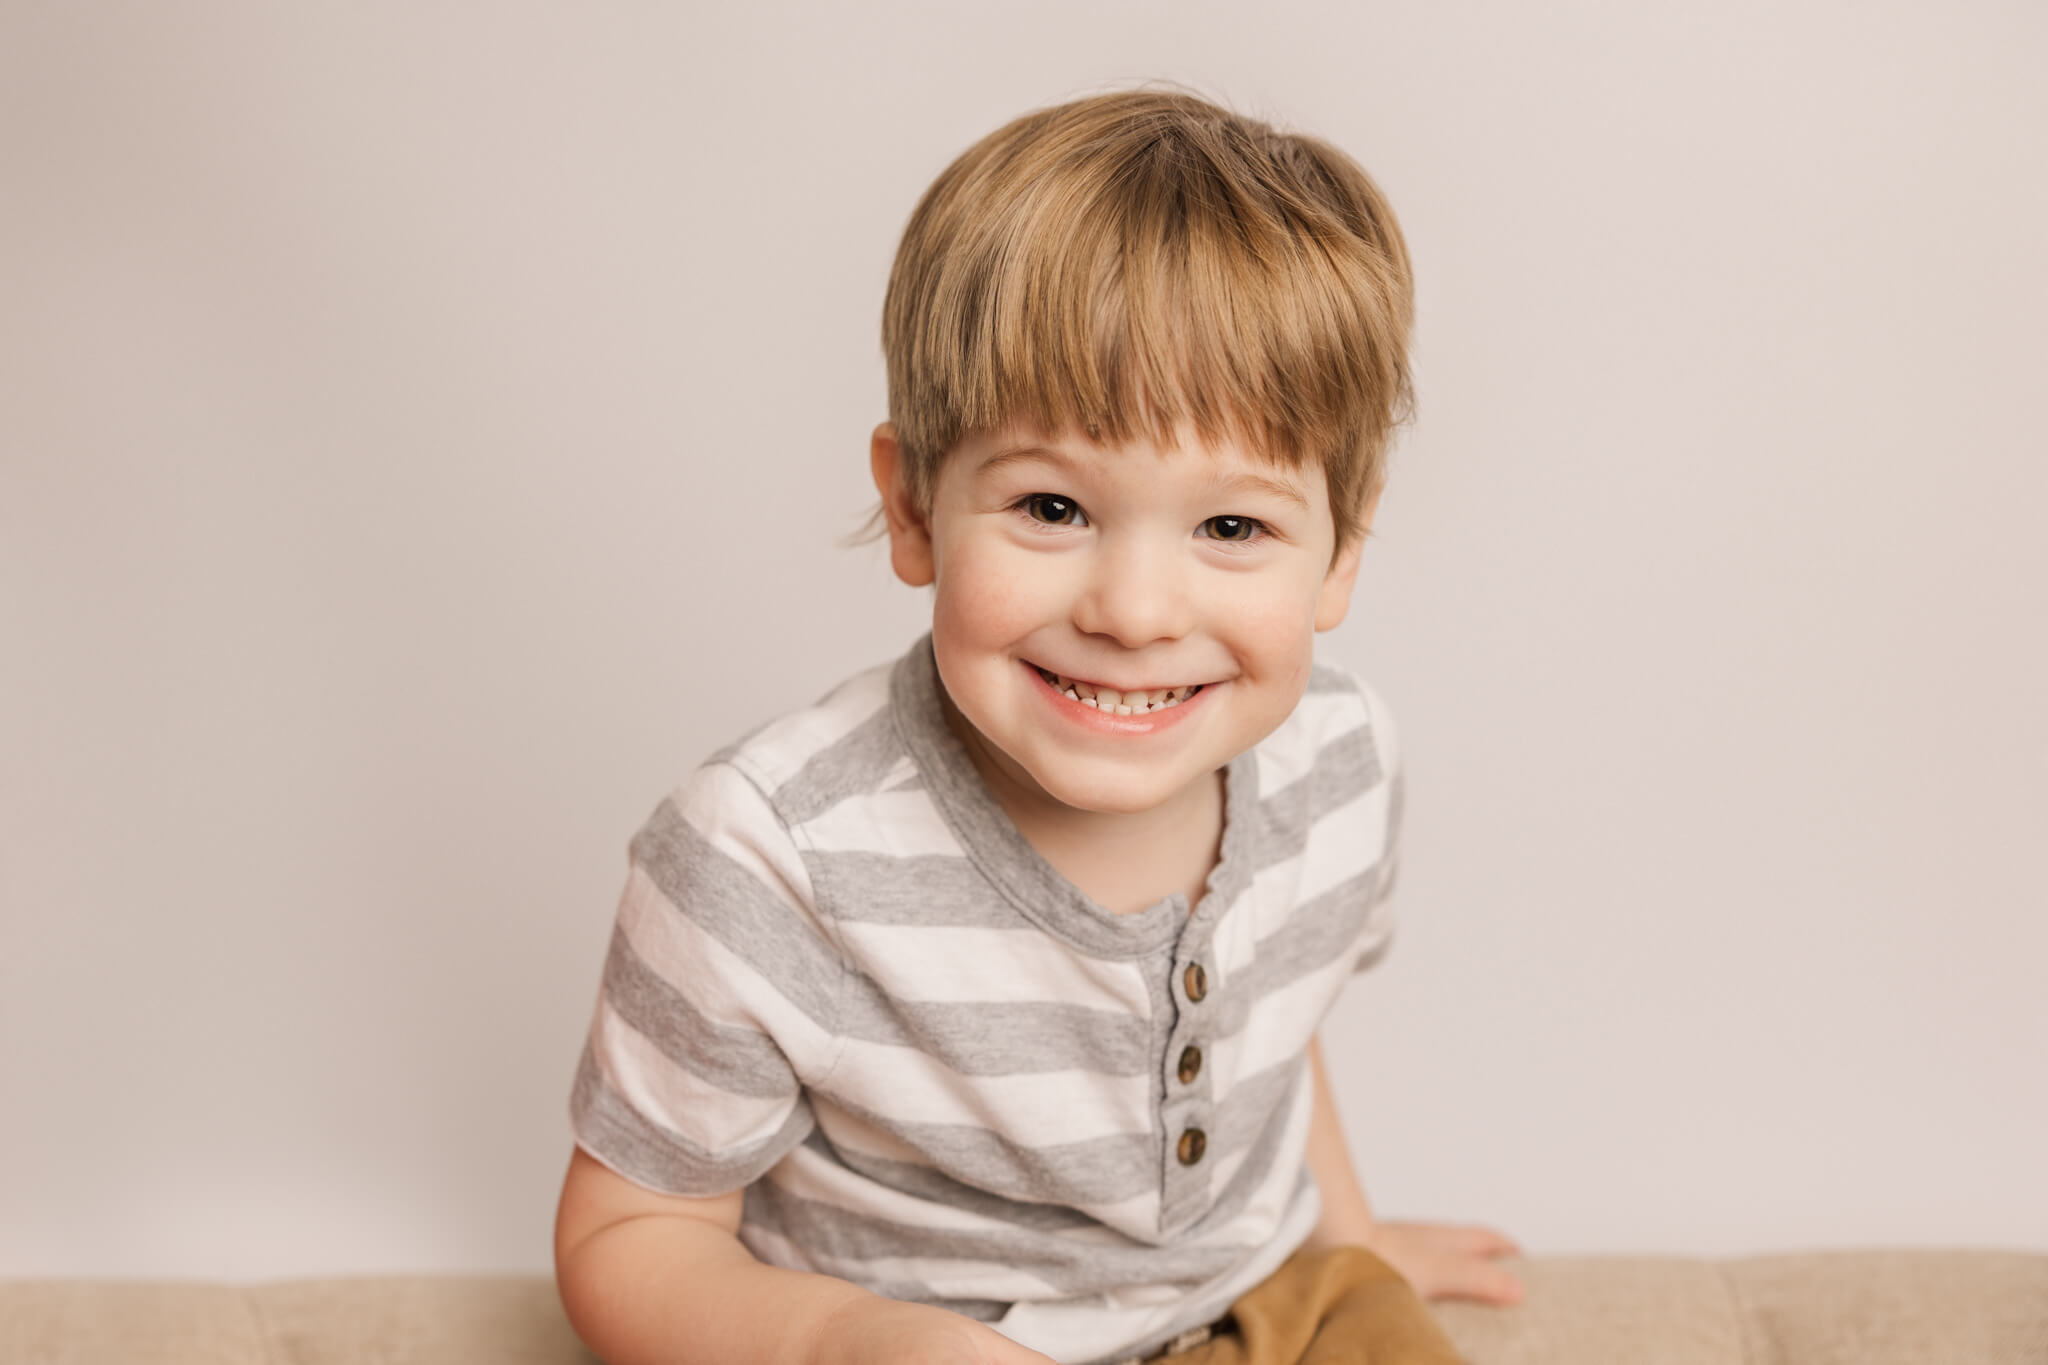 4 year old boy capturing milestone portraits in the studio of Molly Berry Photography